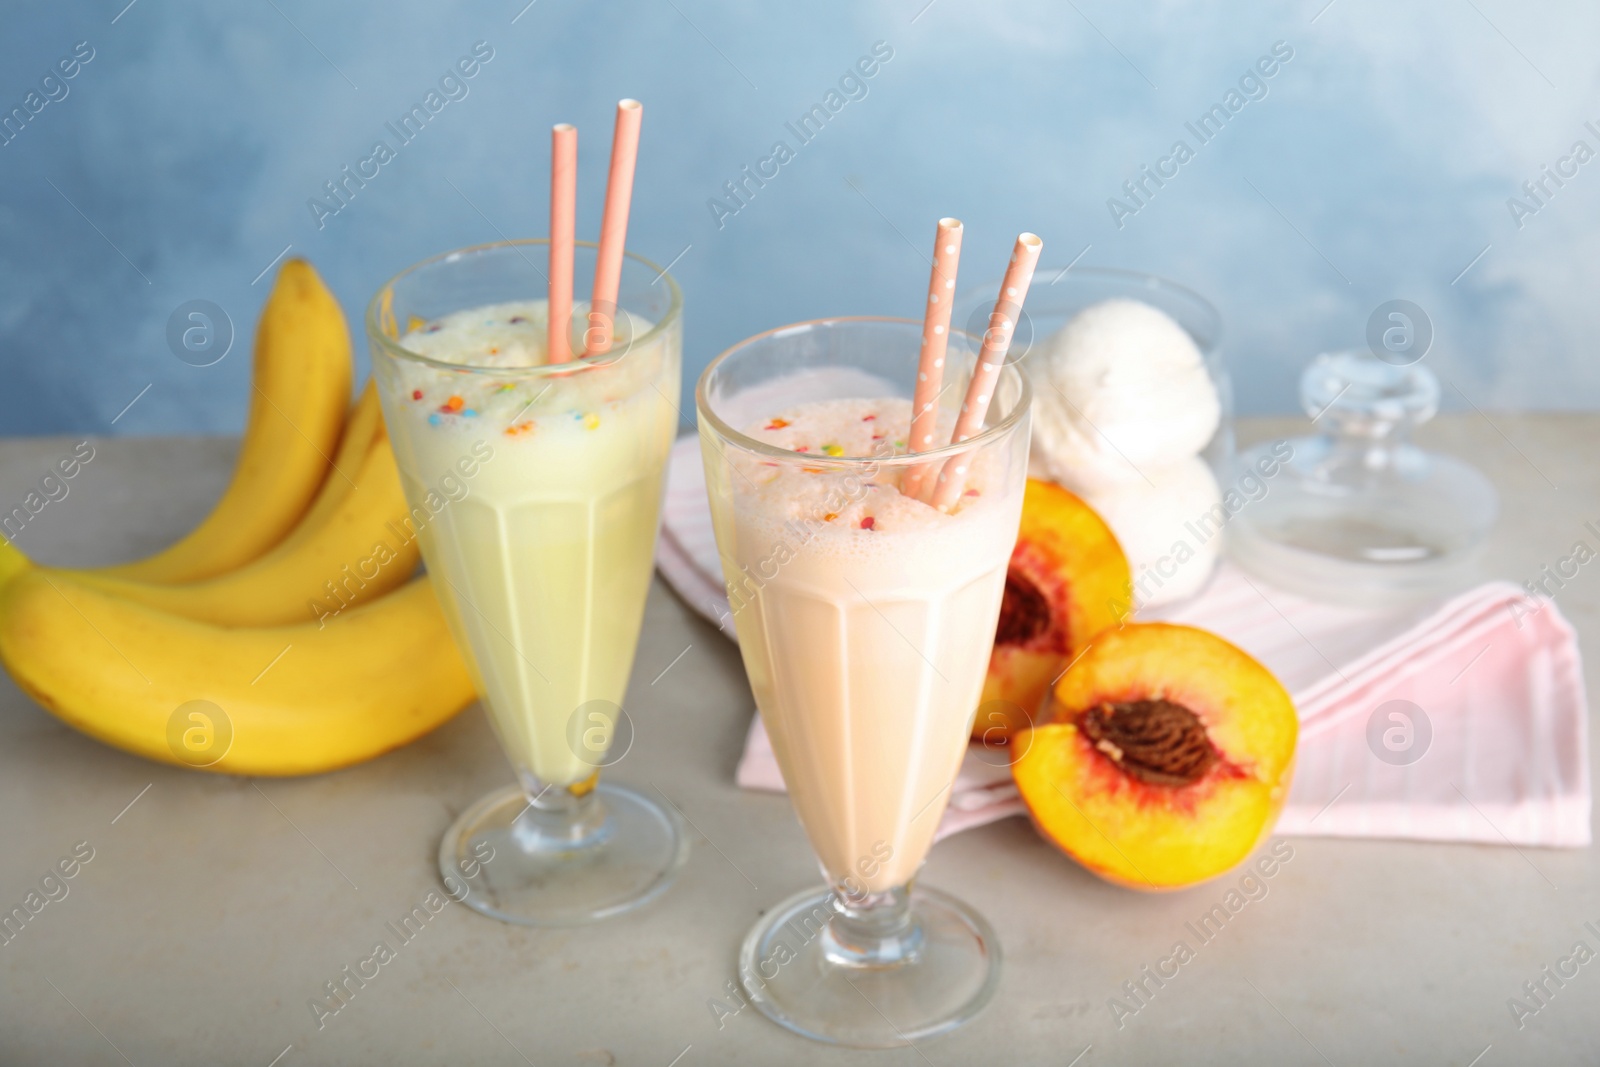 Photo of Delicious milk shakes and ingredients on table against color background